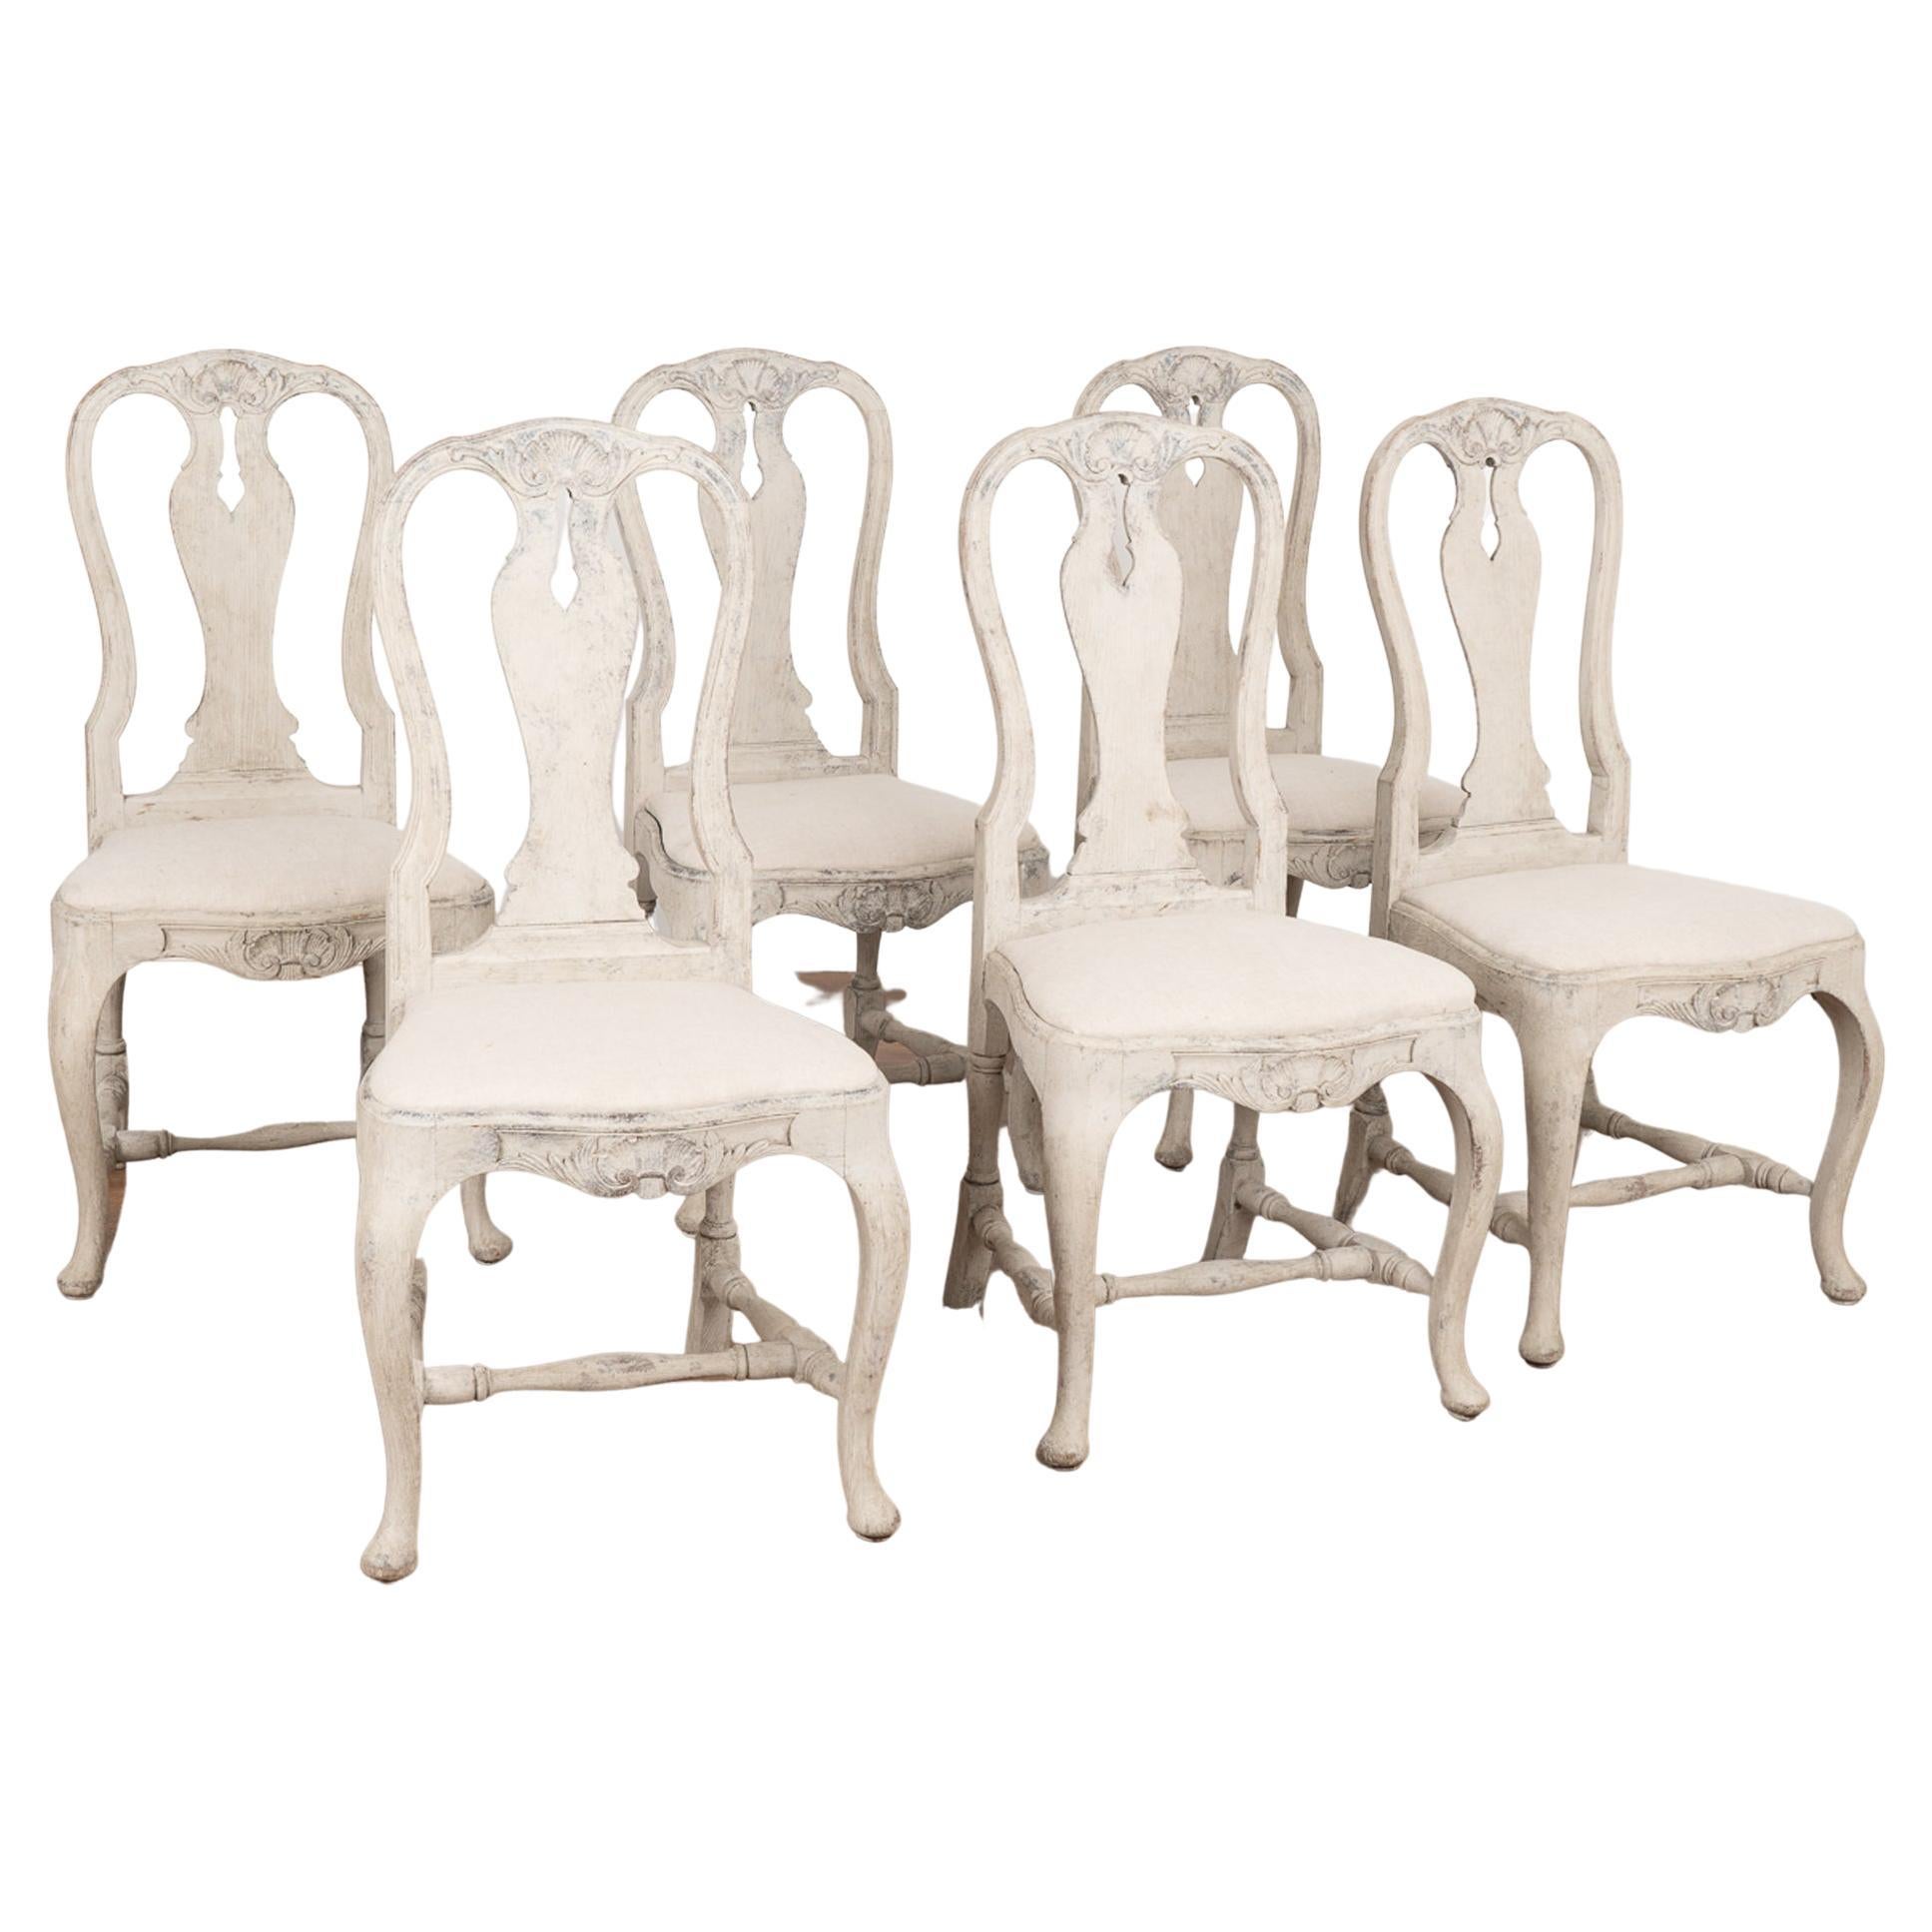 Set of Six Rococo Gray Dining Chairs, Sweden circa 1840-60